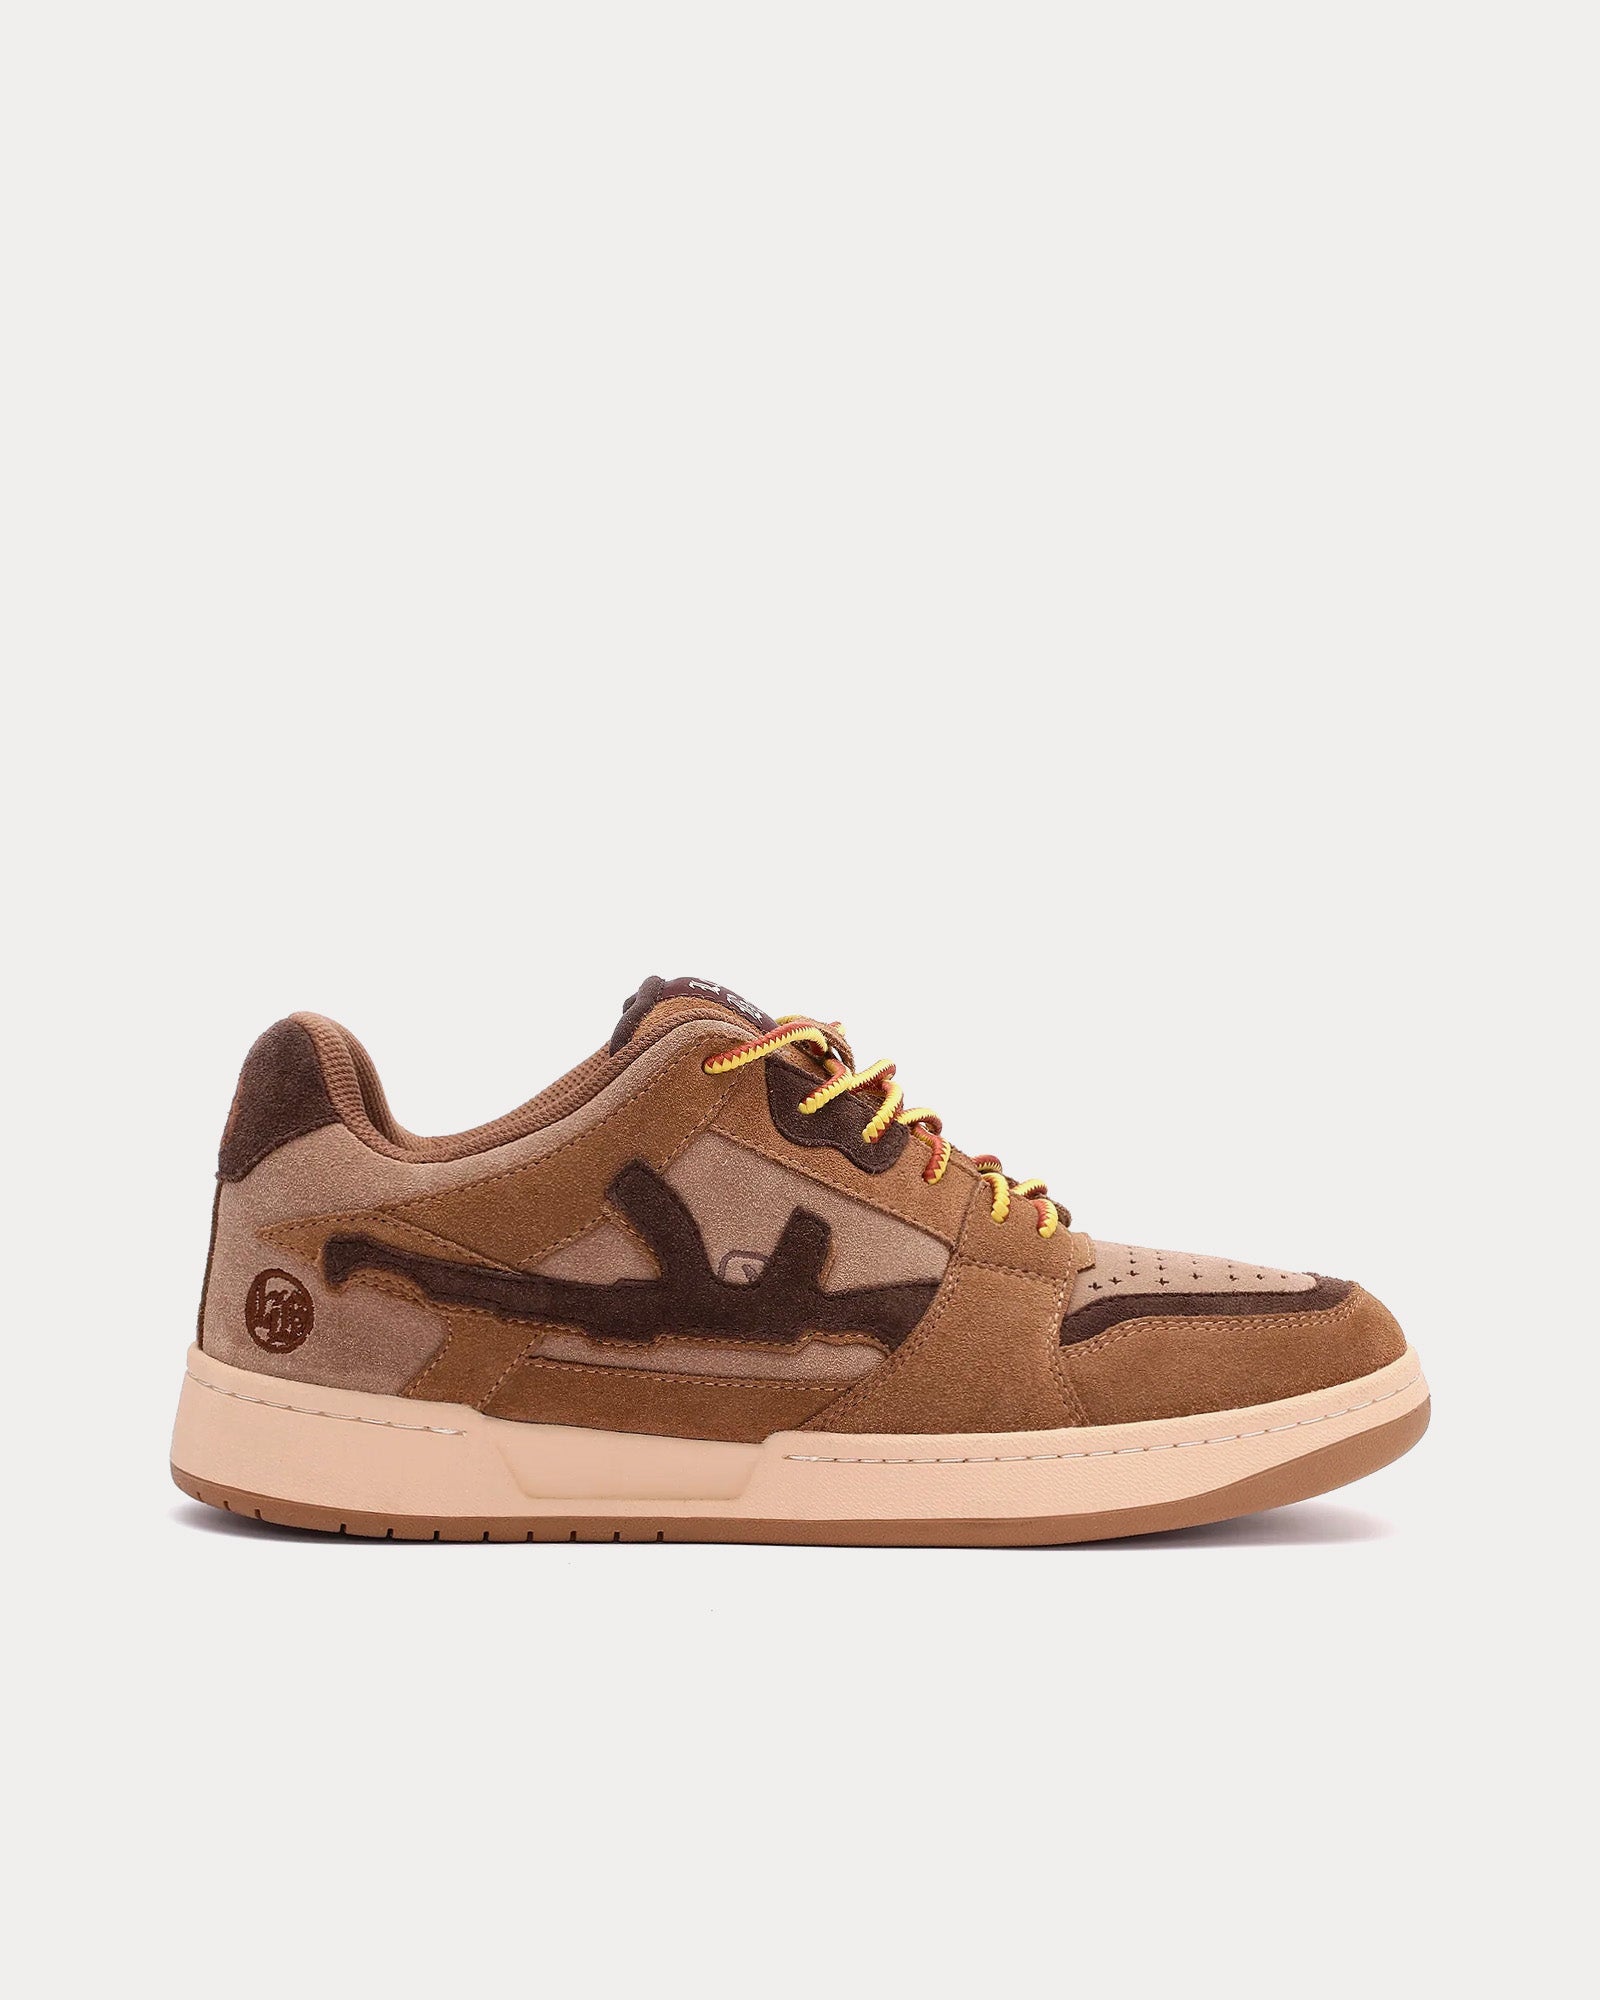 Lost Boys - Timba Lows Light Brown Low Top Sneakers